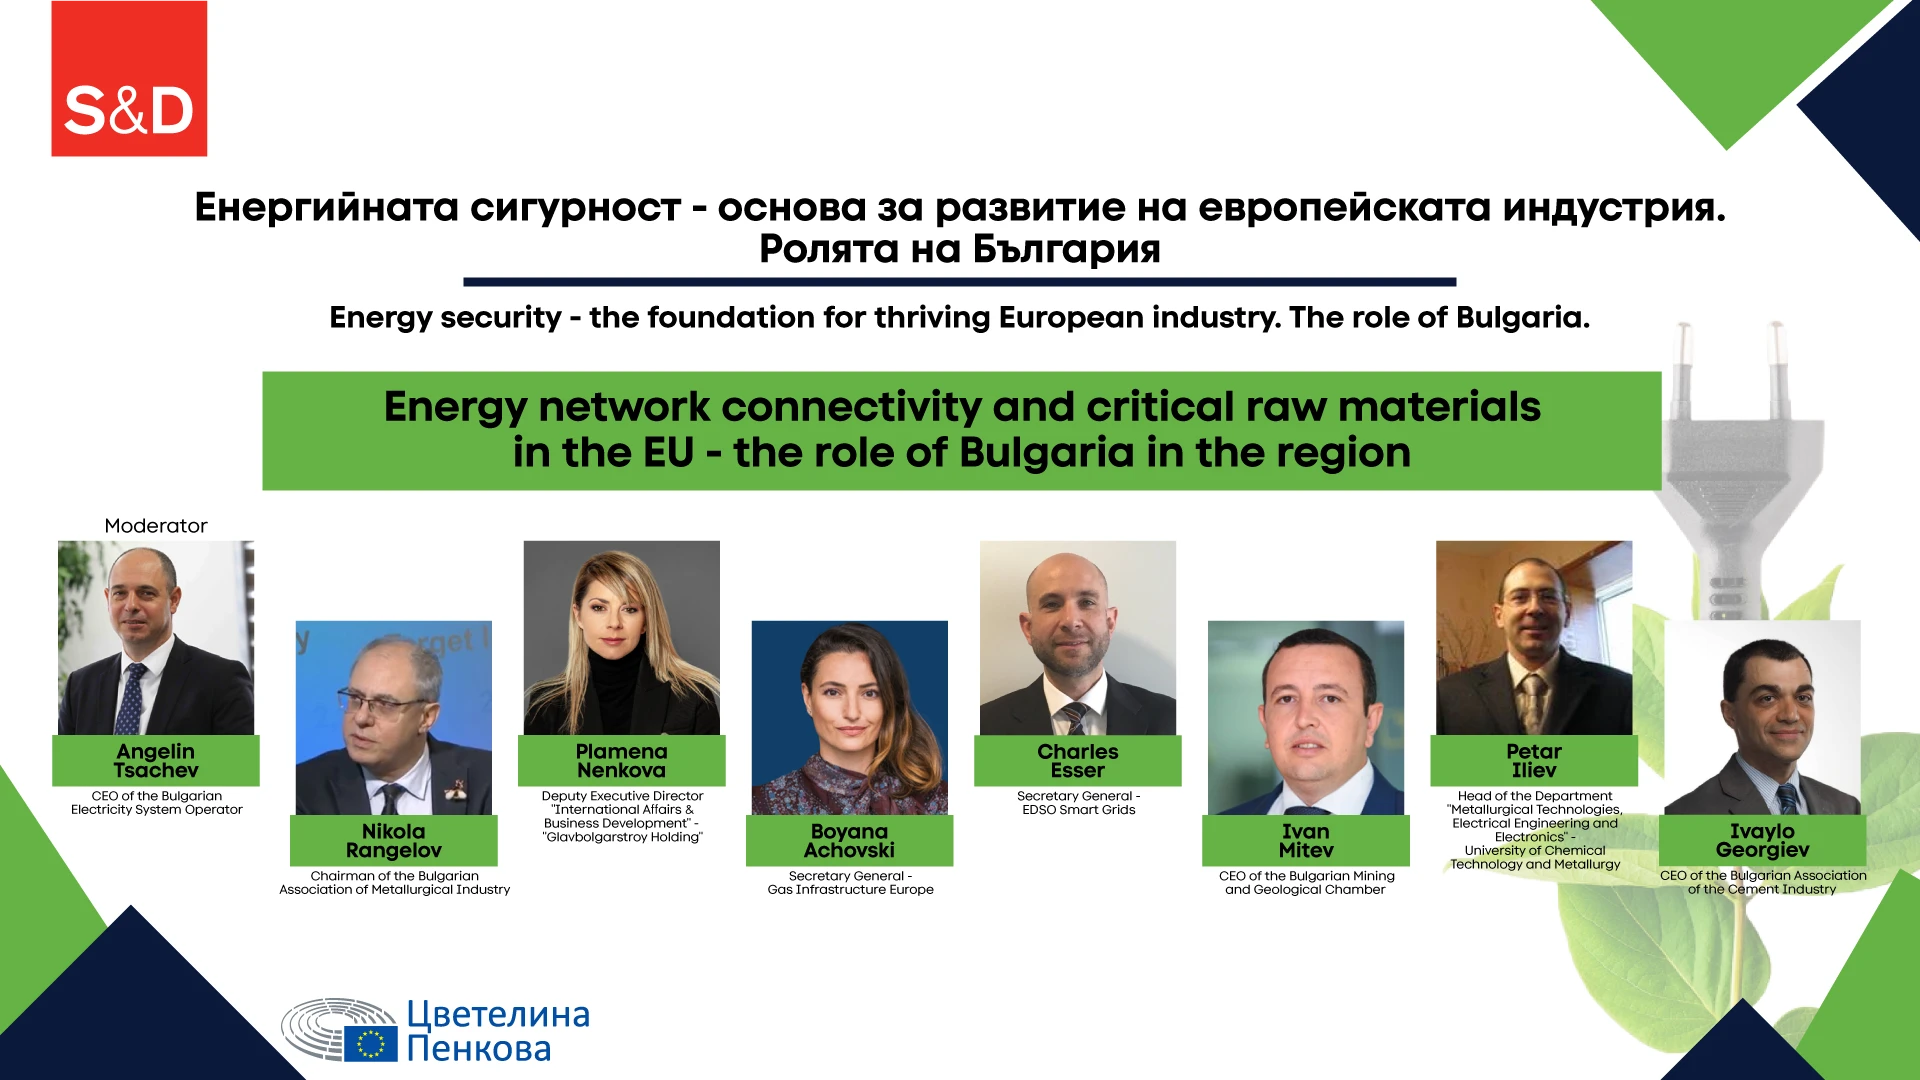 1872-energy-network-connectivity-and-critical-raw-materials-in-the-eu---the-role-of-b-17109656467279.png